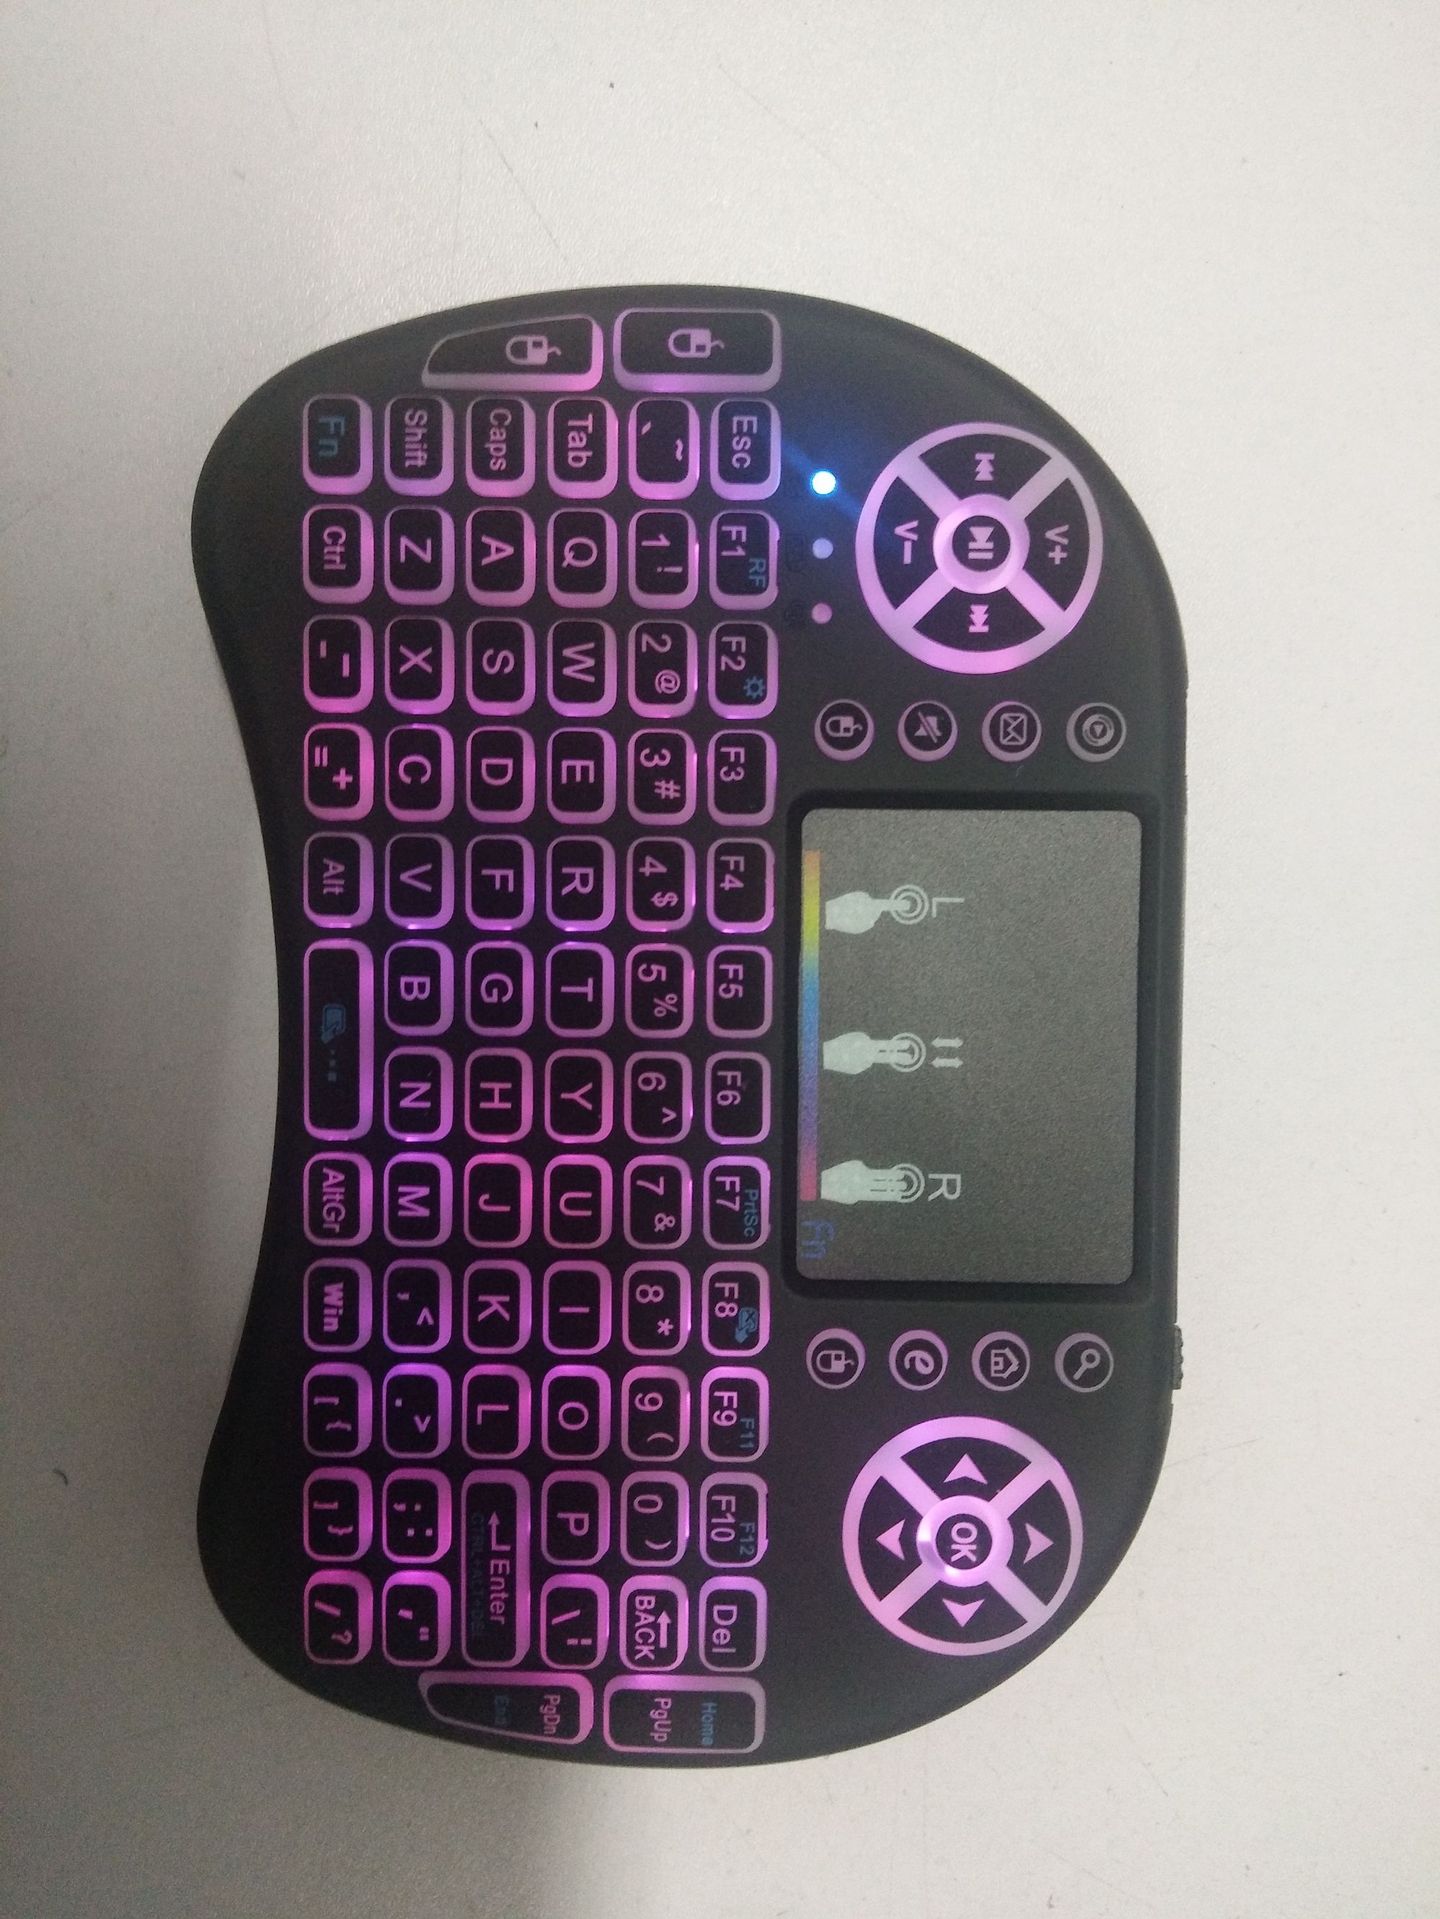 Amazon Aliexpress Cross-Border E-Commerce Hot-Selling Product I8 Air Mouse Remote Control Mini Keyboard